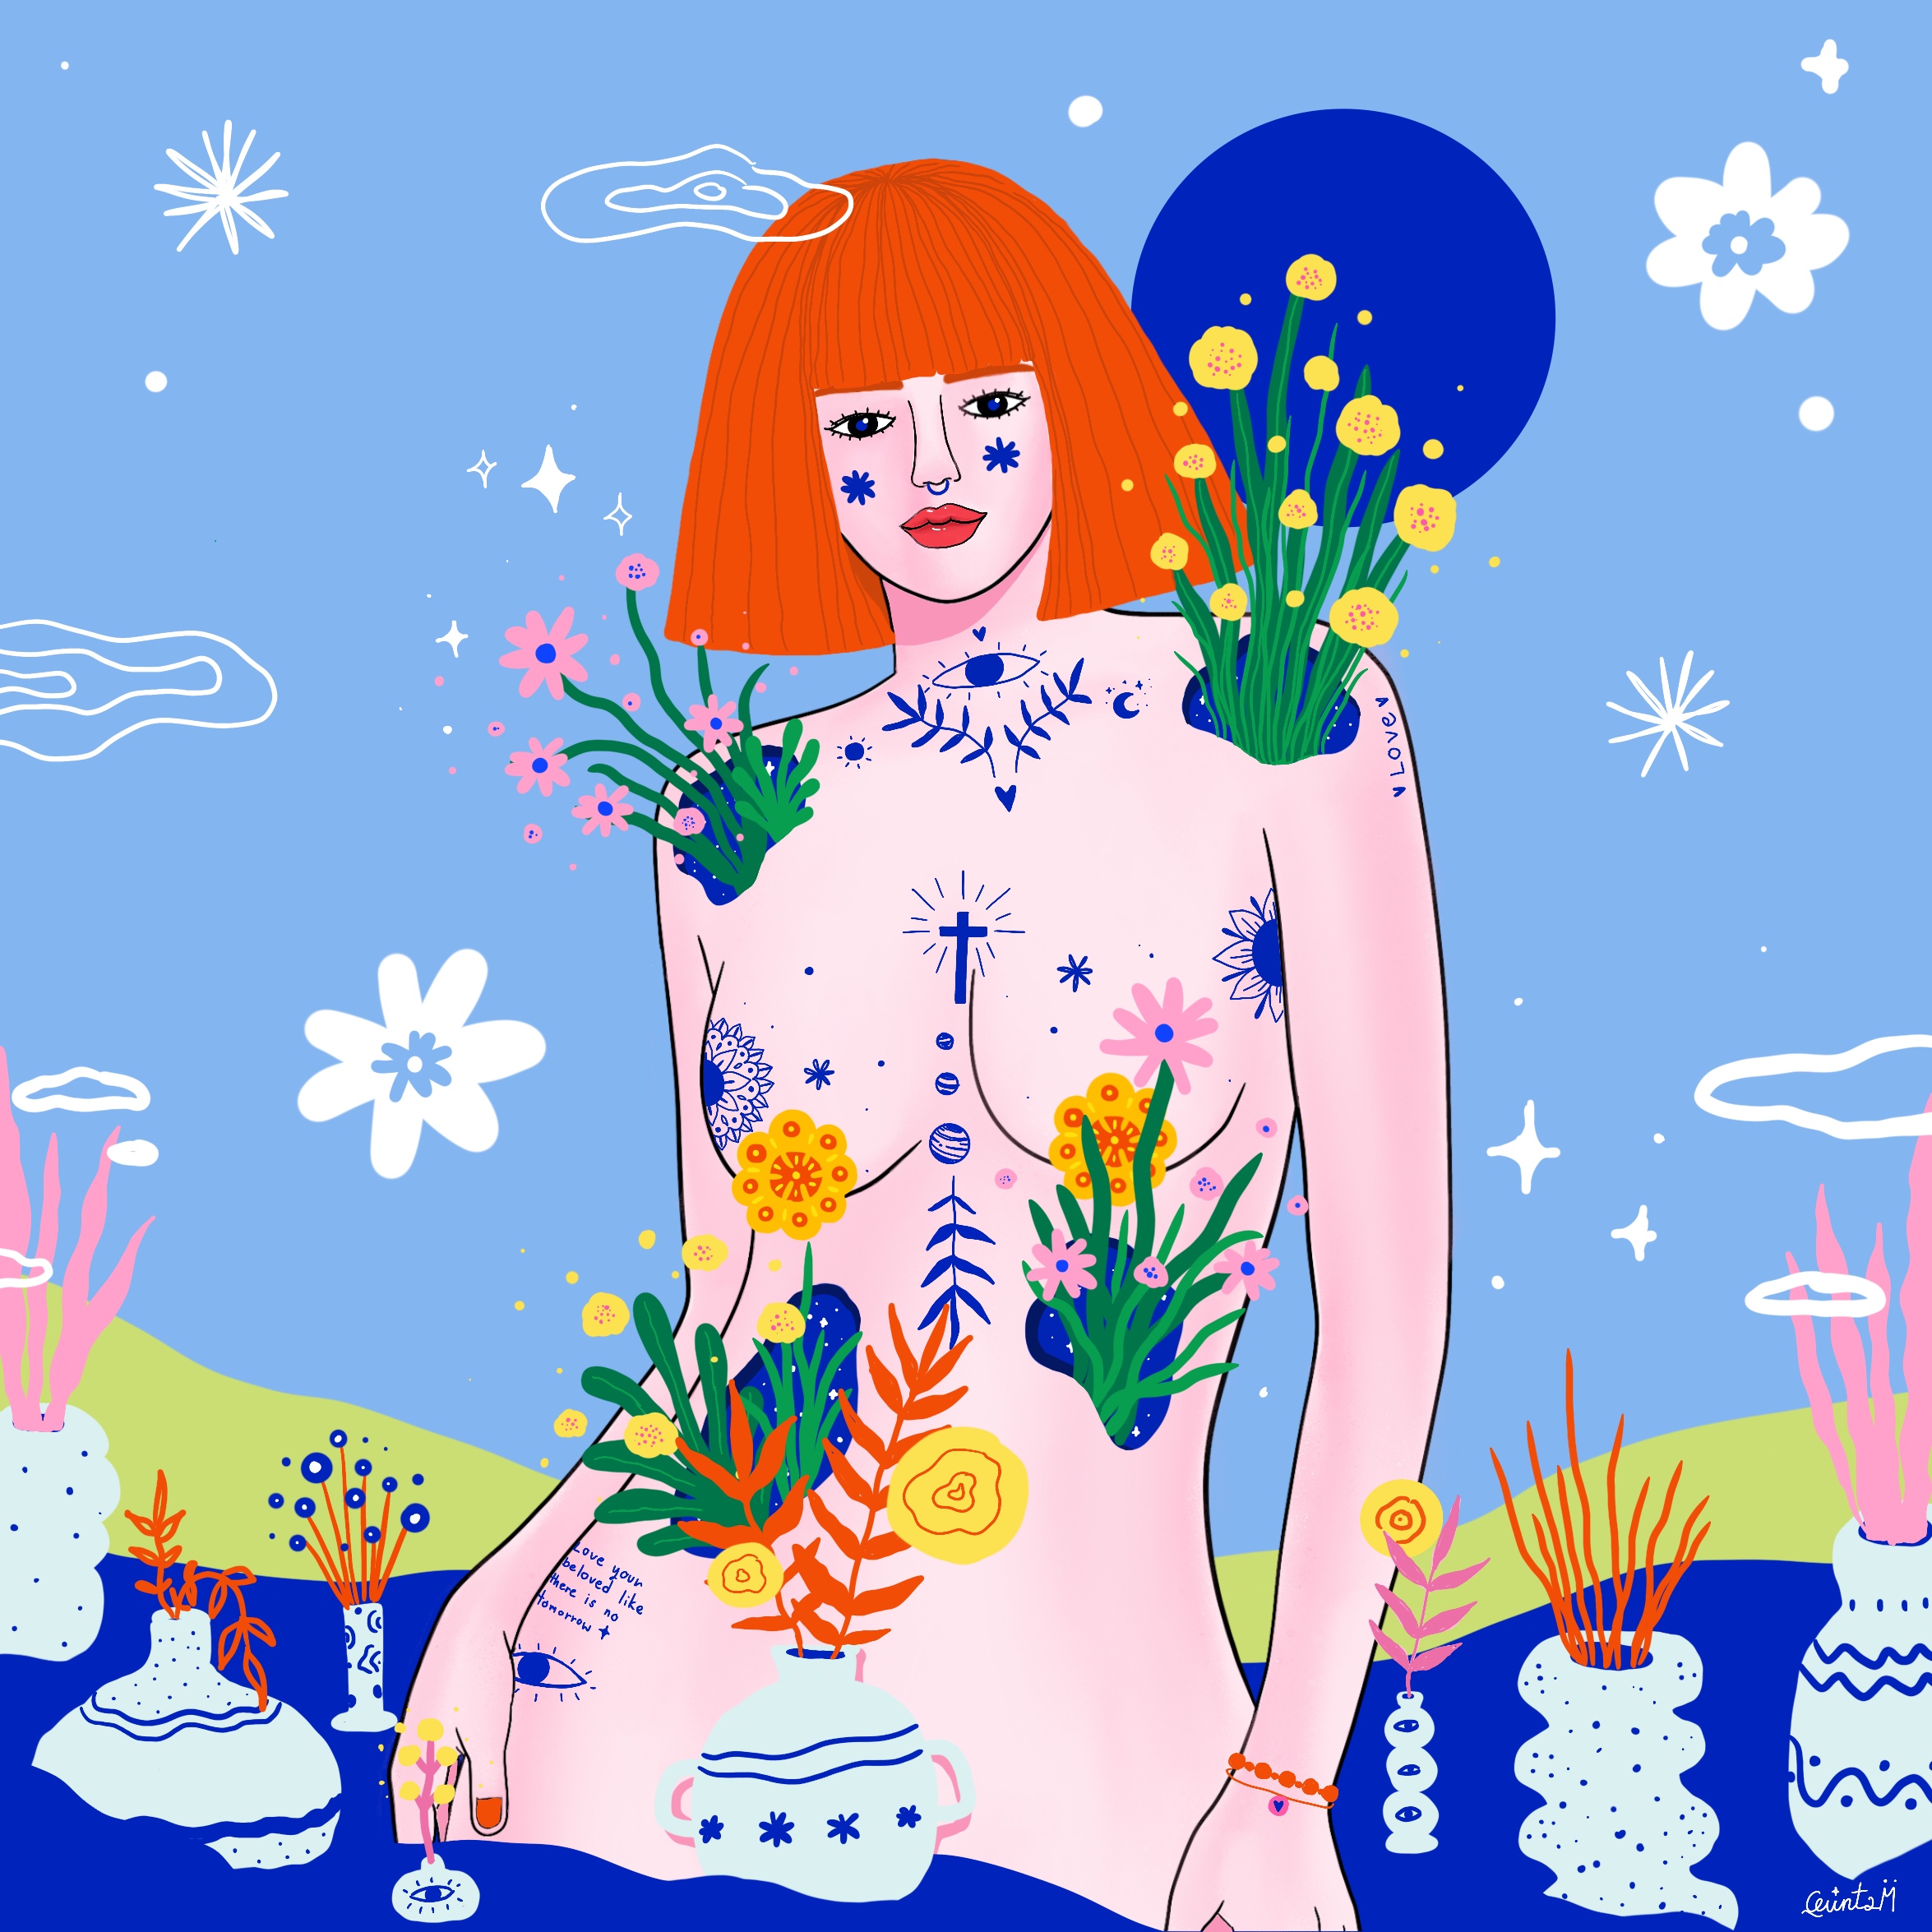 ✽ A girl of vases ✽